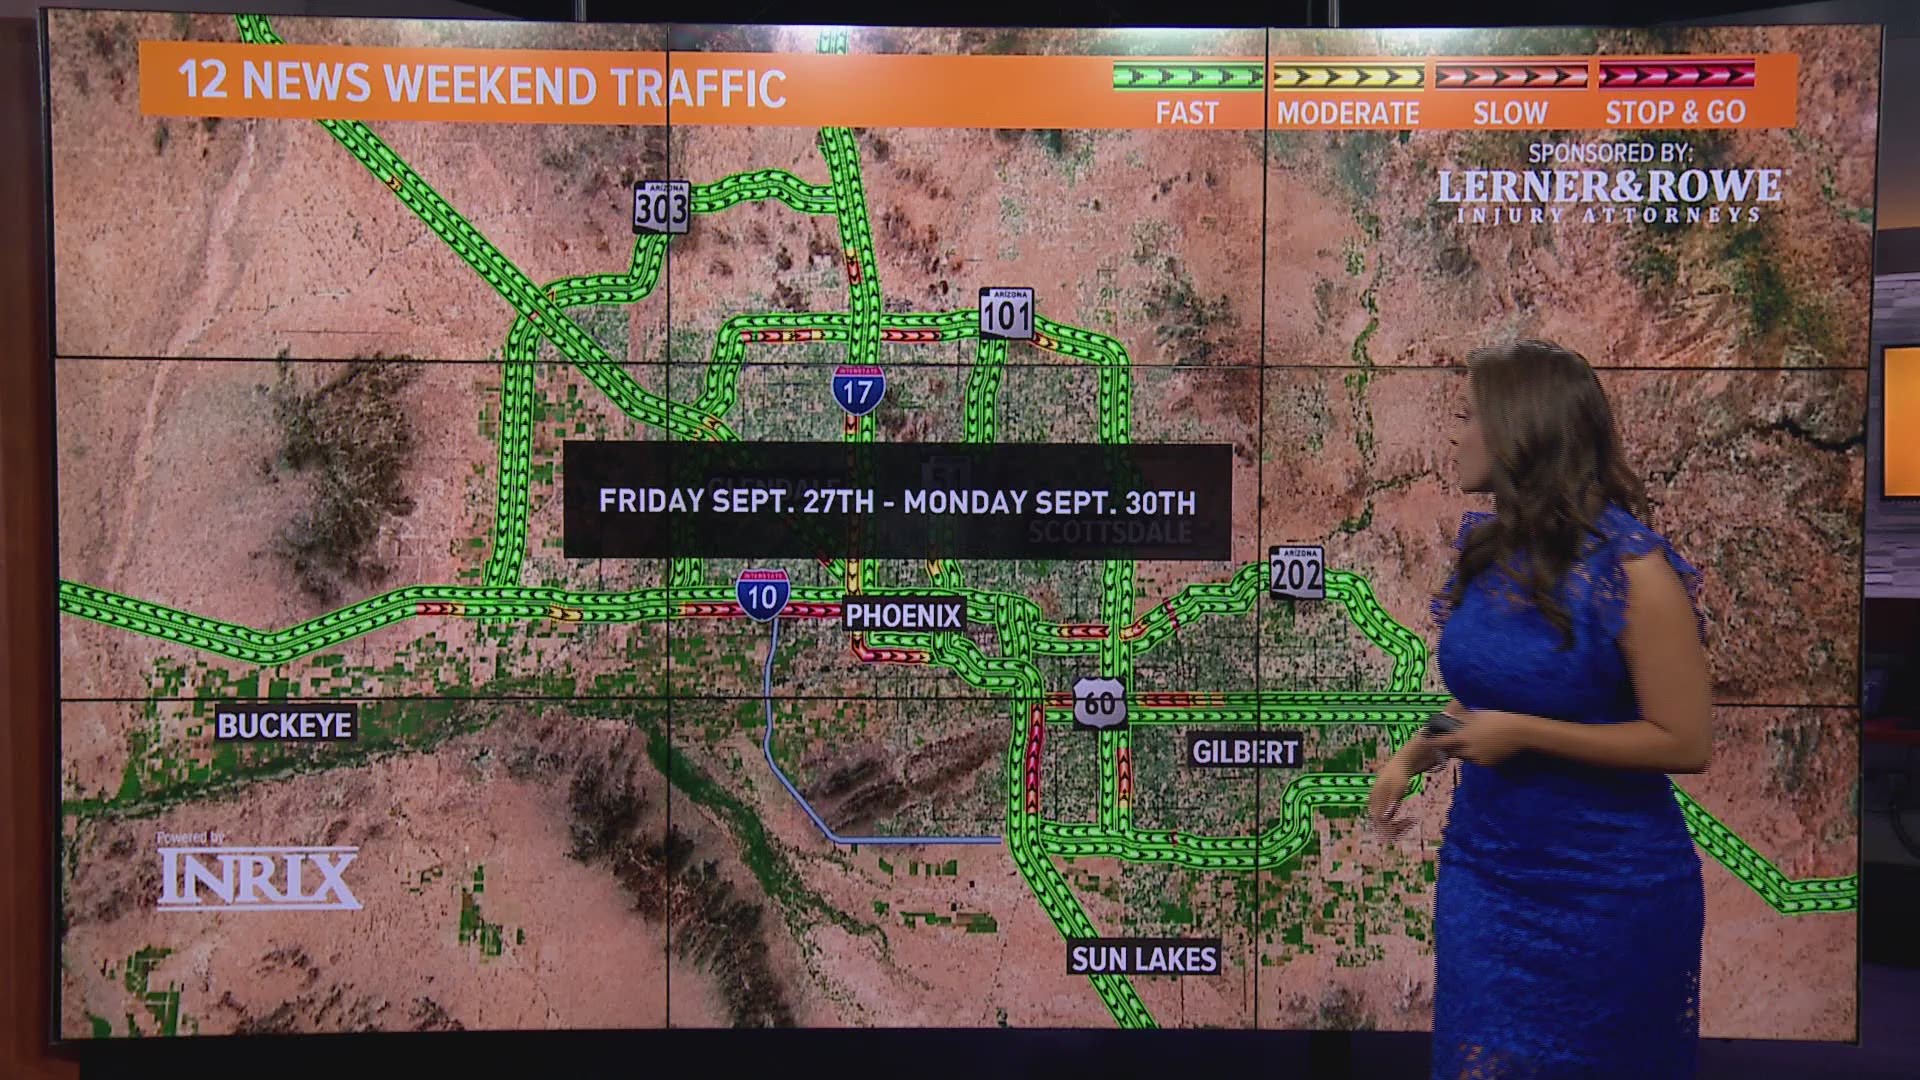 Here's your weekend traffic report for Sept. 27 through Sept. 30.